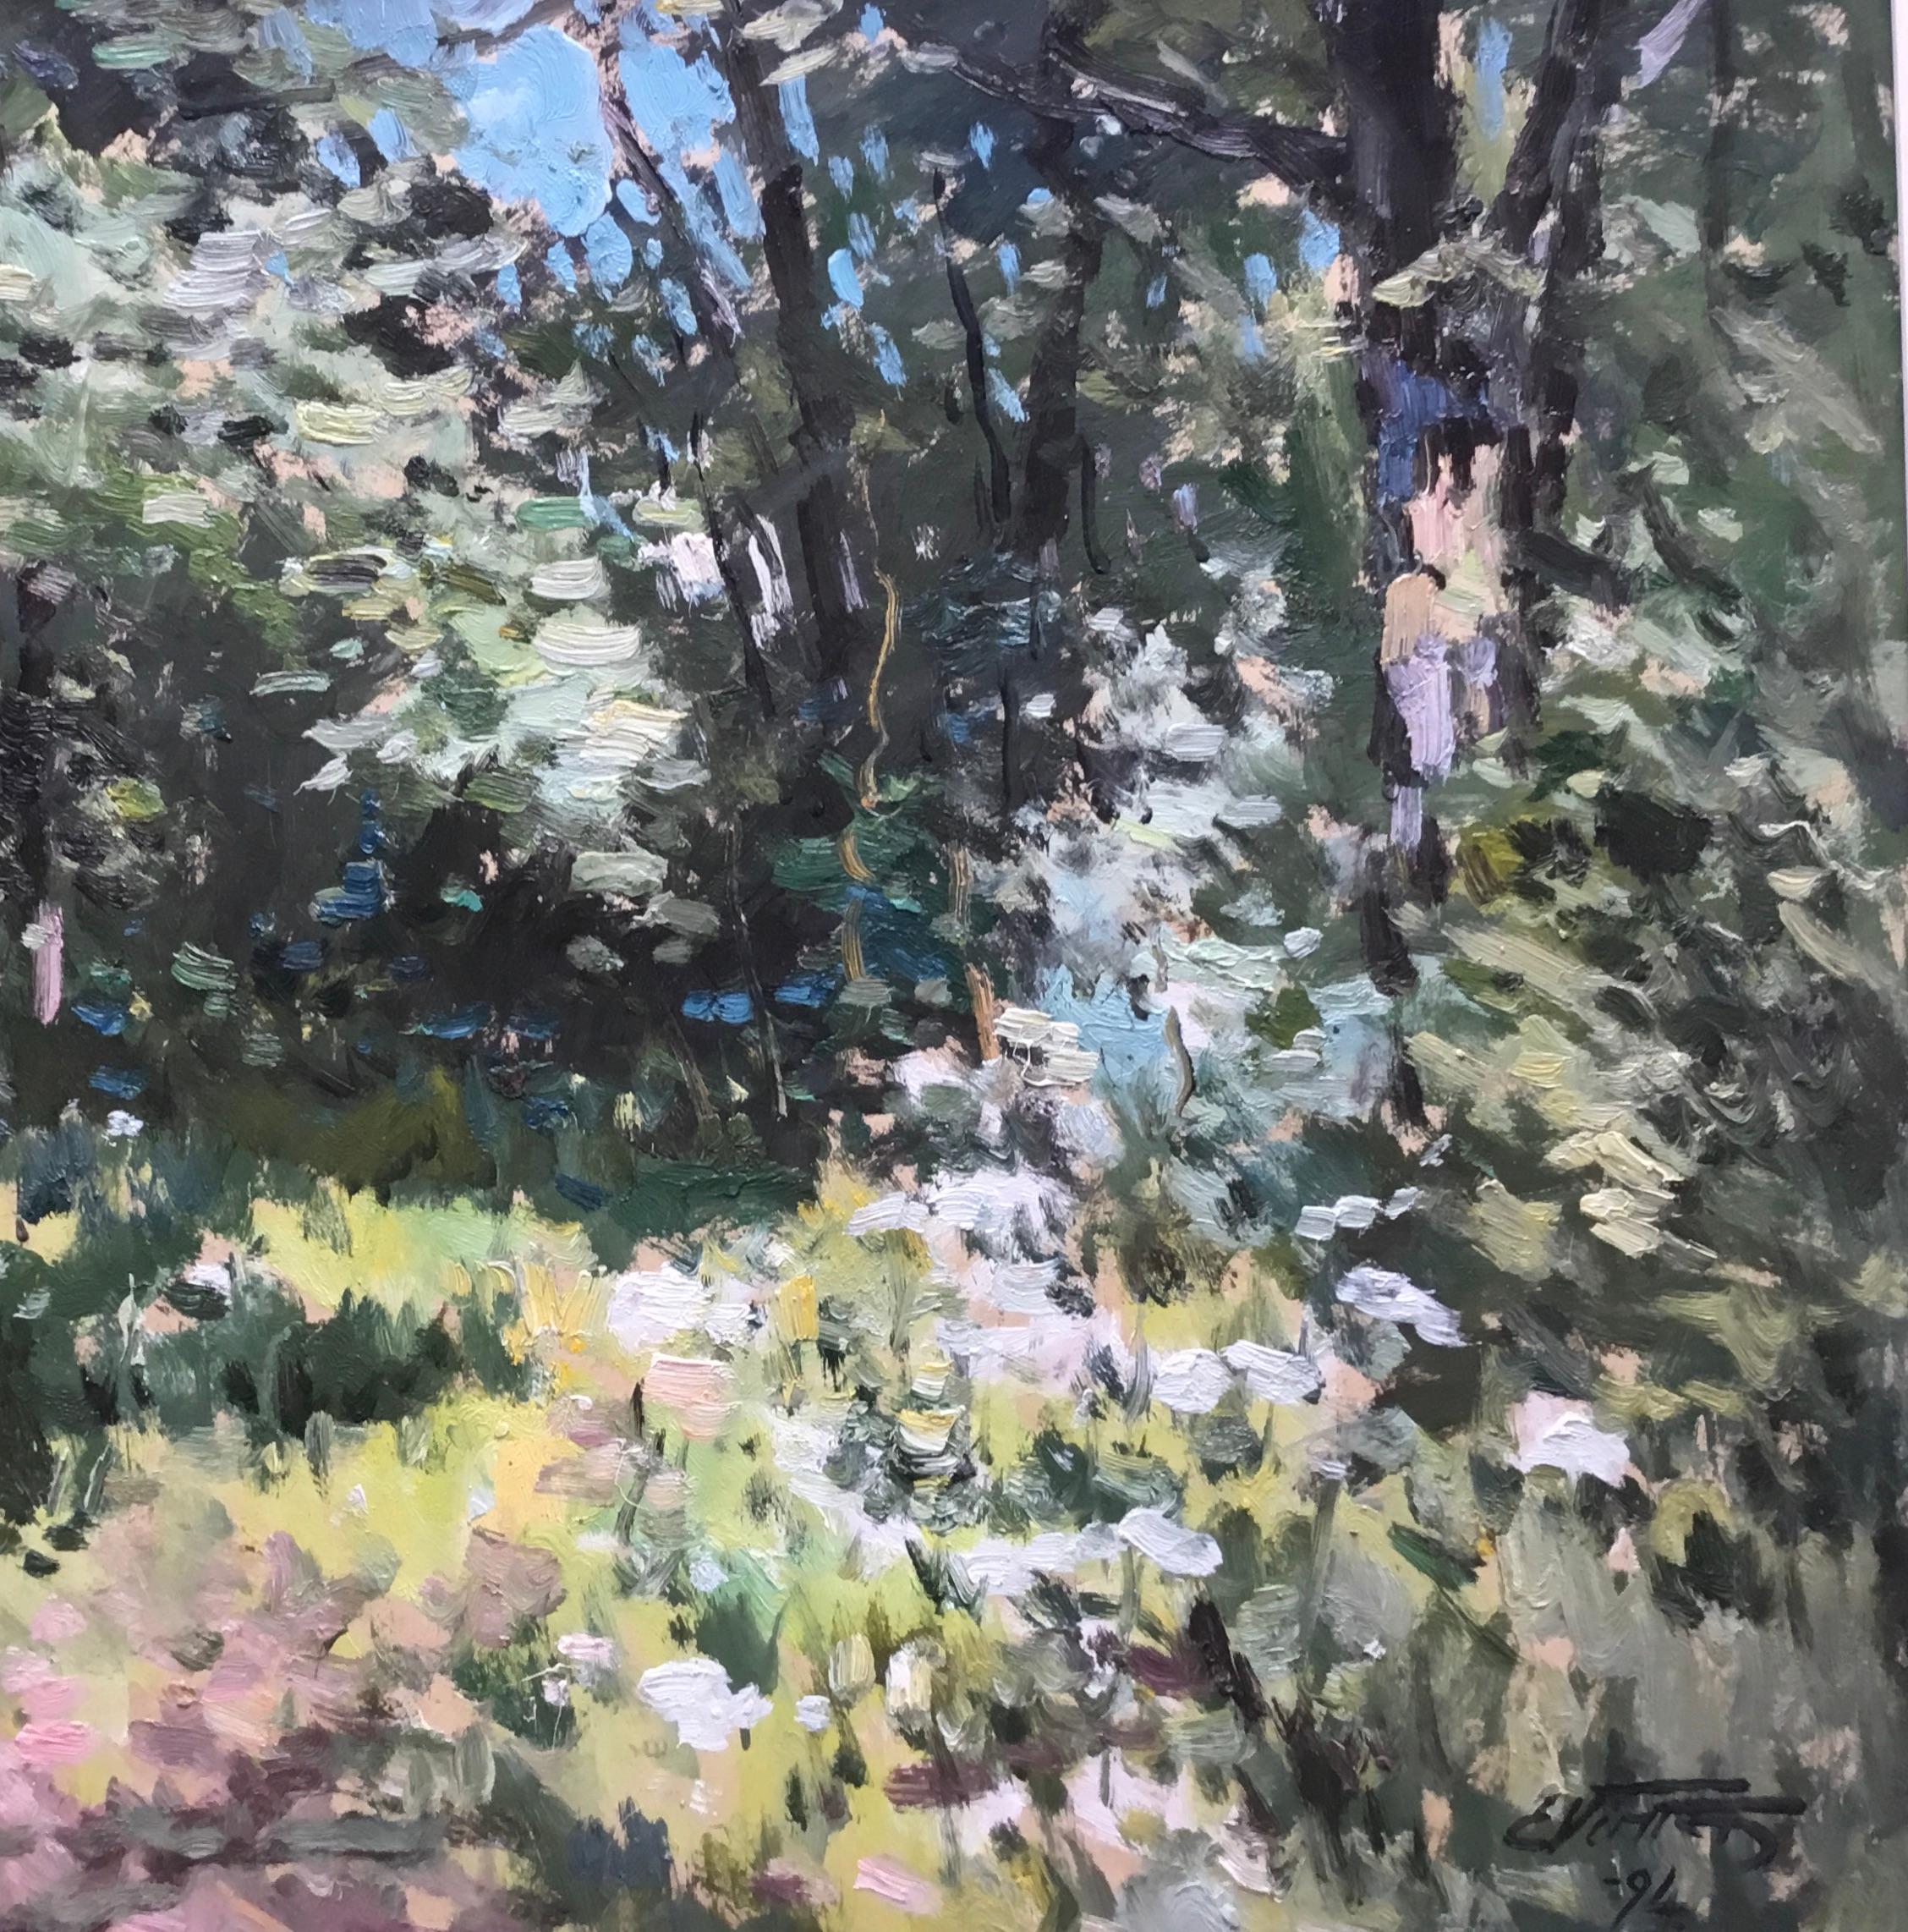 IN THE SHADE OF THE TREES.EDGAR VINTERS 1914_2014 impressionist  - Gray Landscape Painting by Edgar Vinters